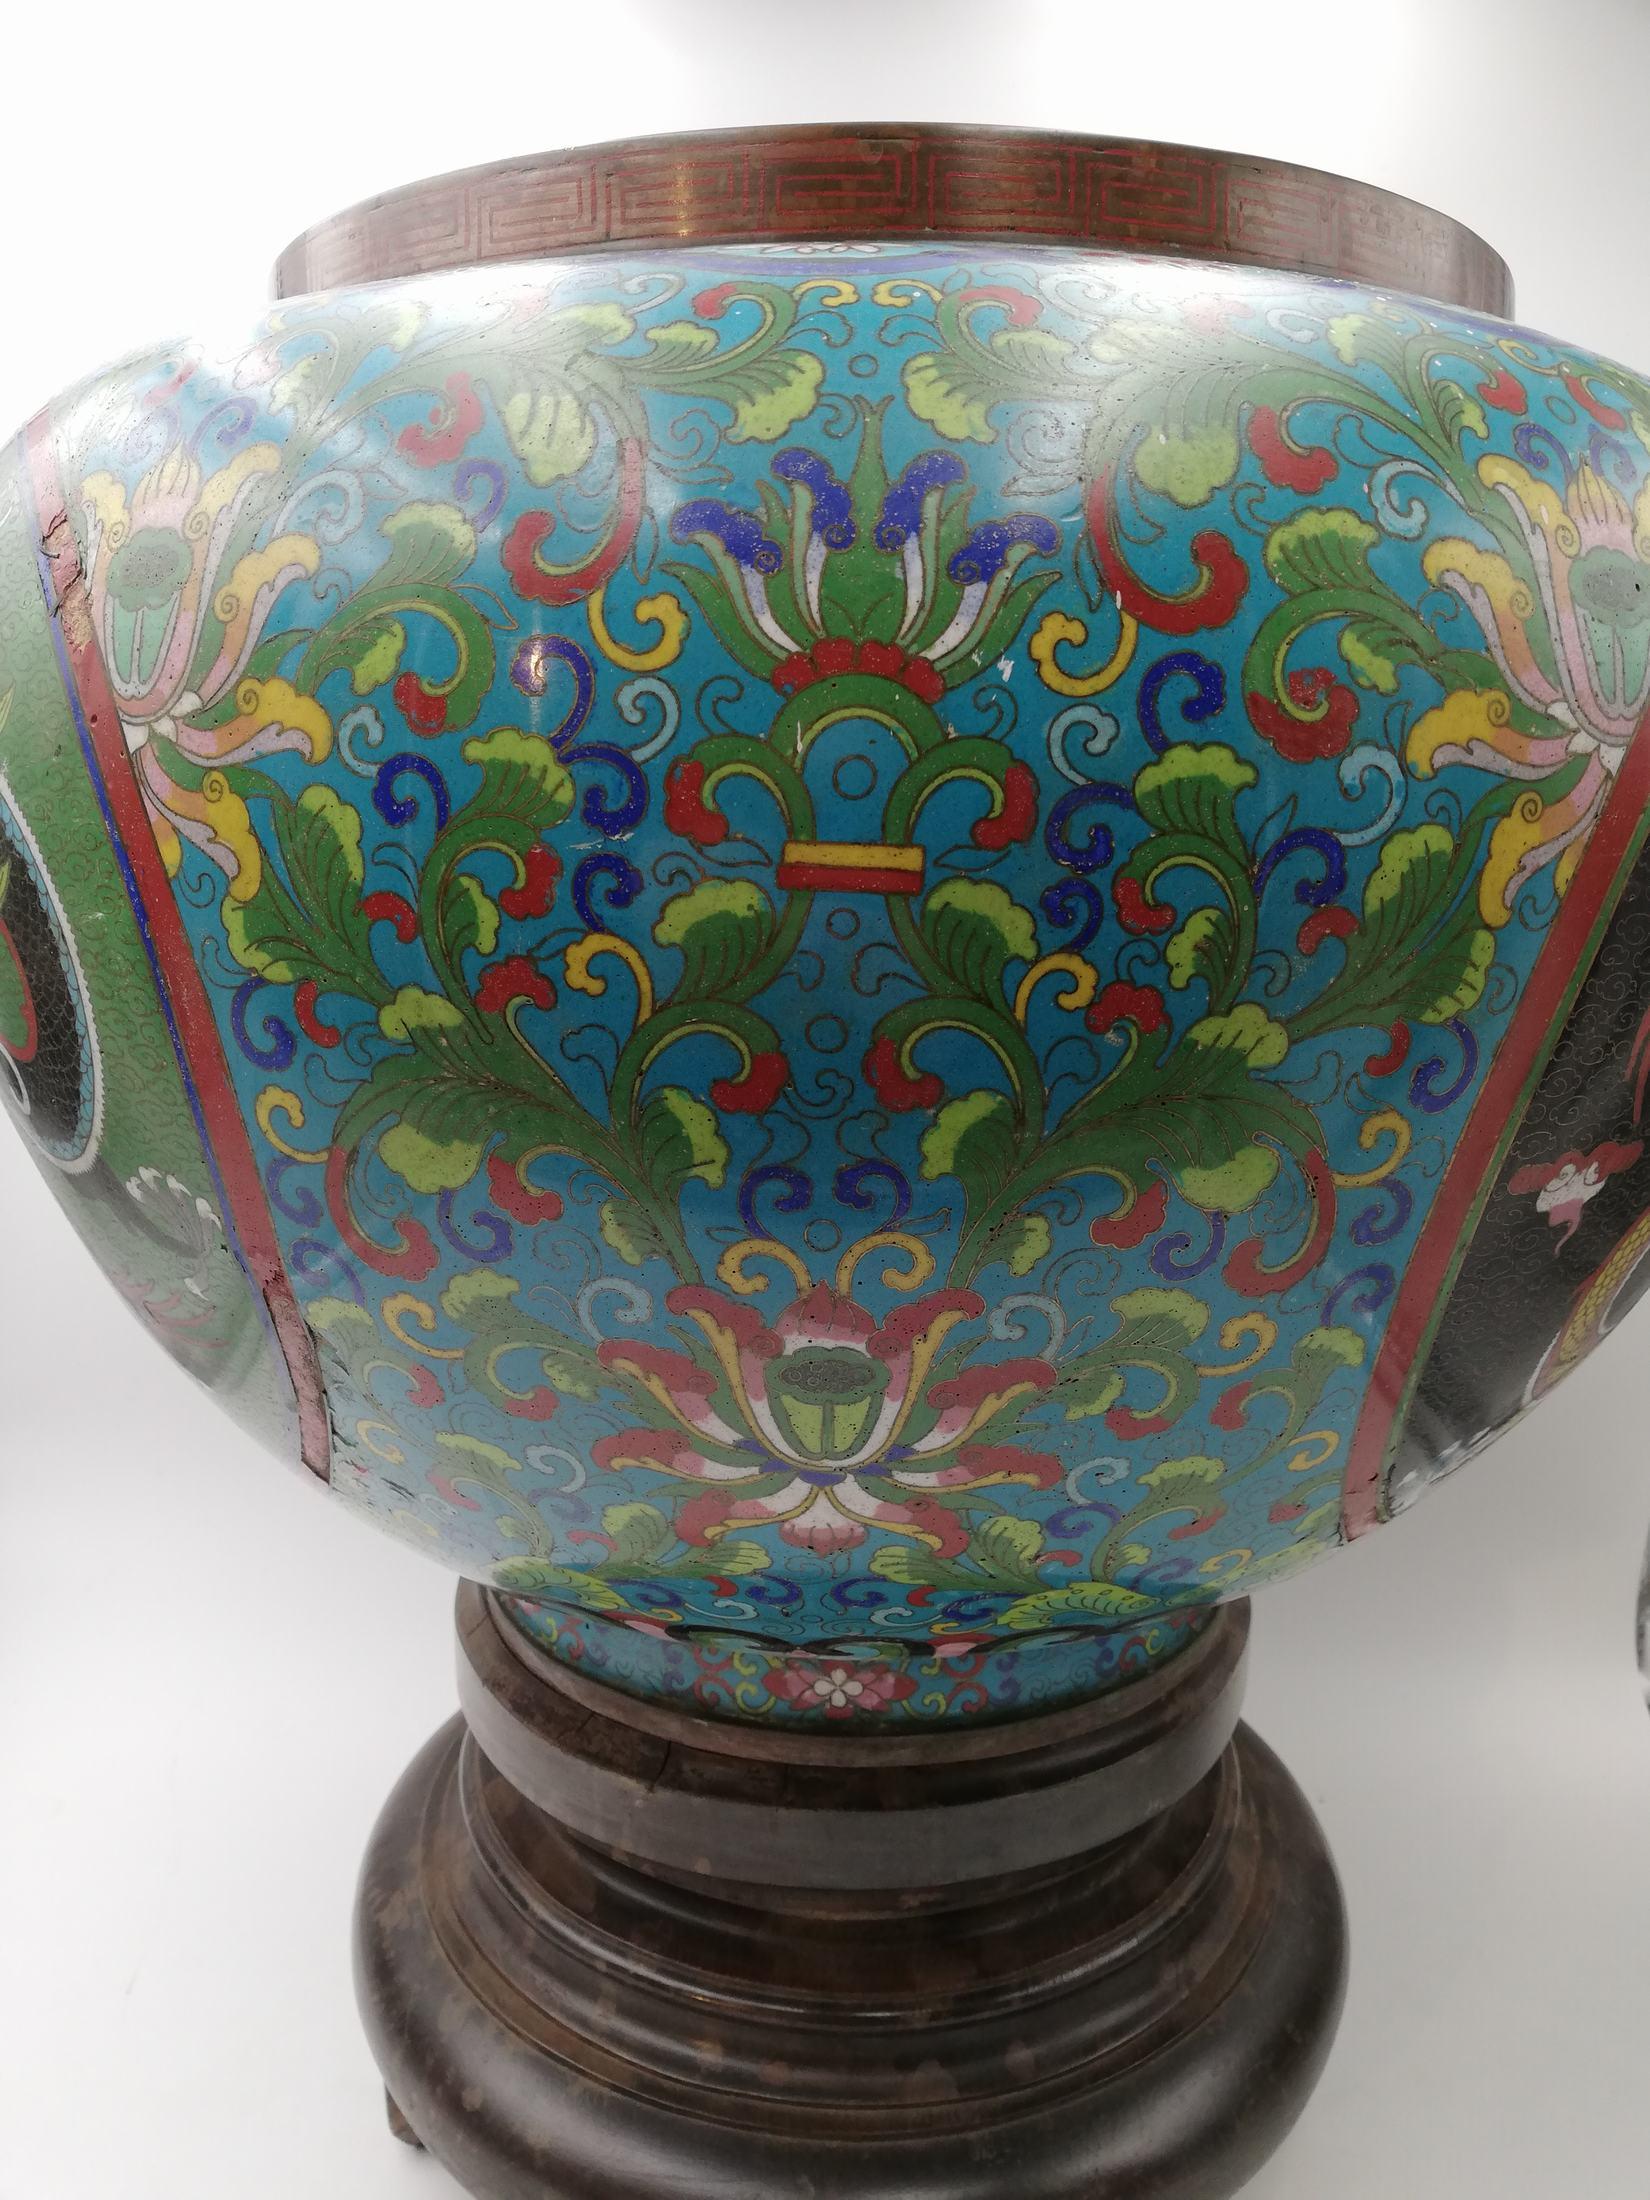 Spherical Vase Forming Planter Cloisonné Decorated with Polychrome Floral Motifs In Good Condition For Sale In Madrid, ES